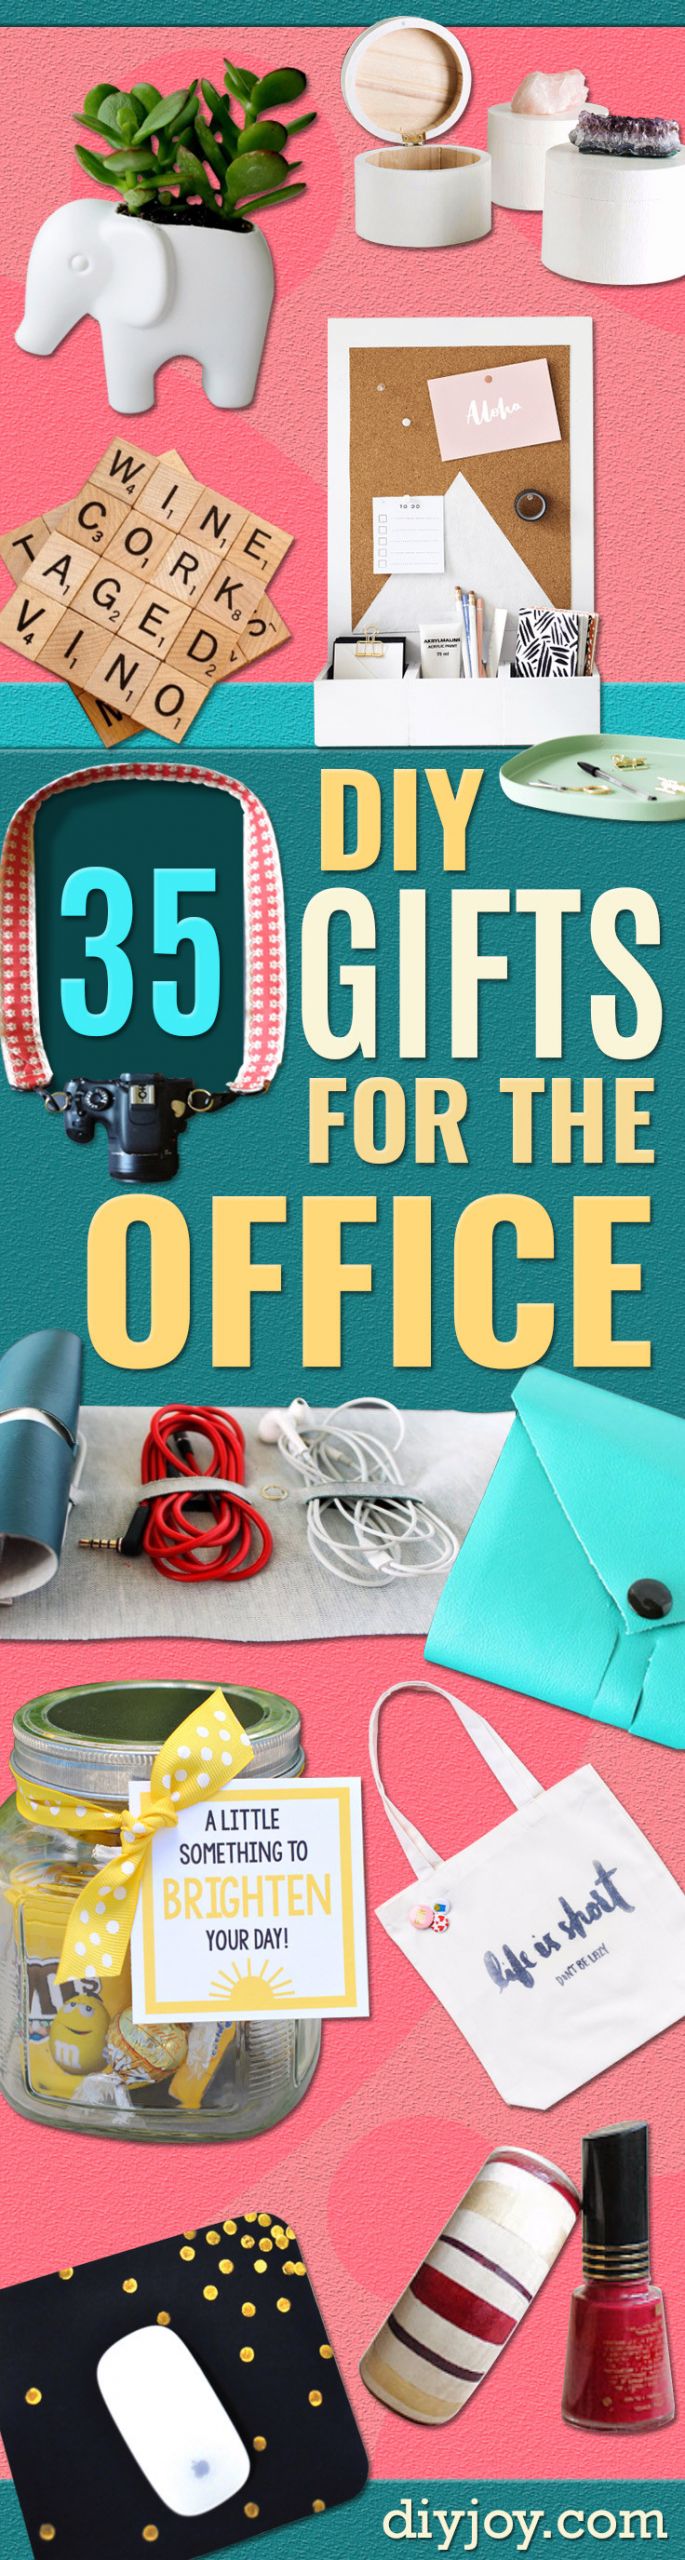 Office Holiday Party Gift Ideas
 35 DIY Gifts for The fice